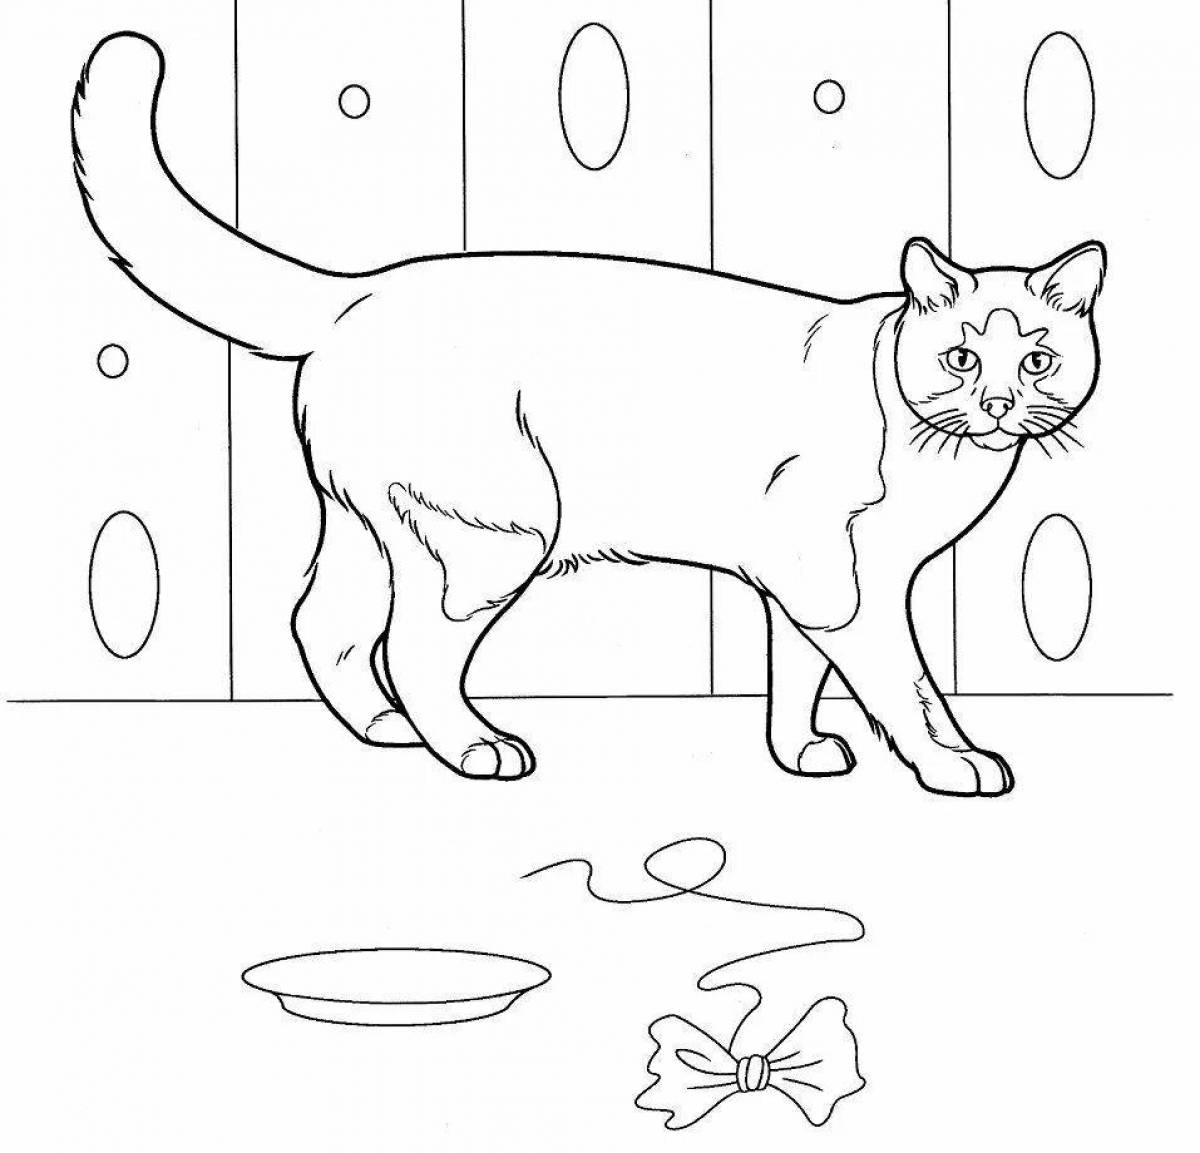 Friendly cat coloring pages for boys